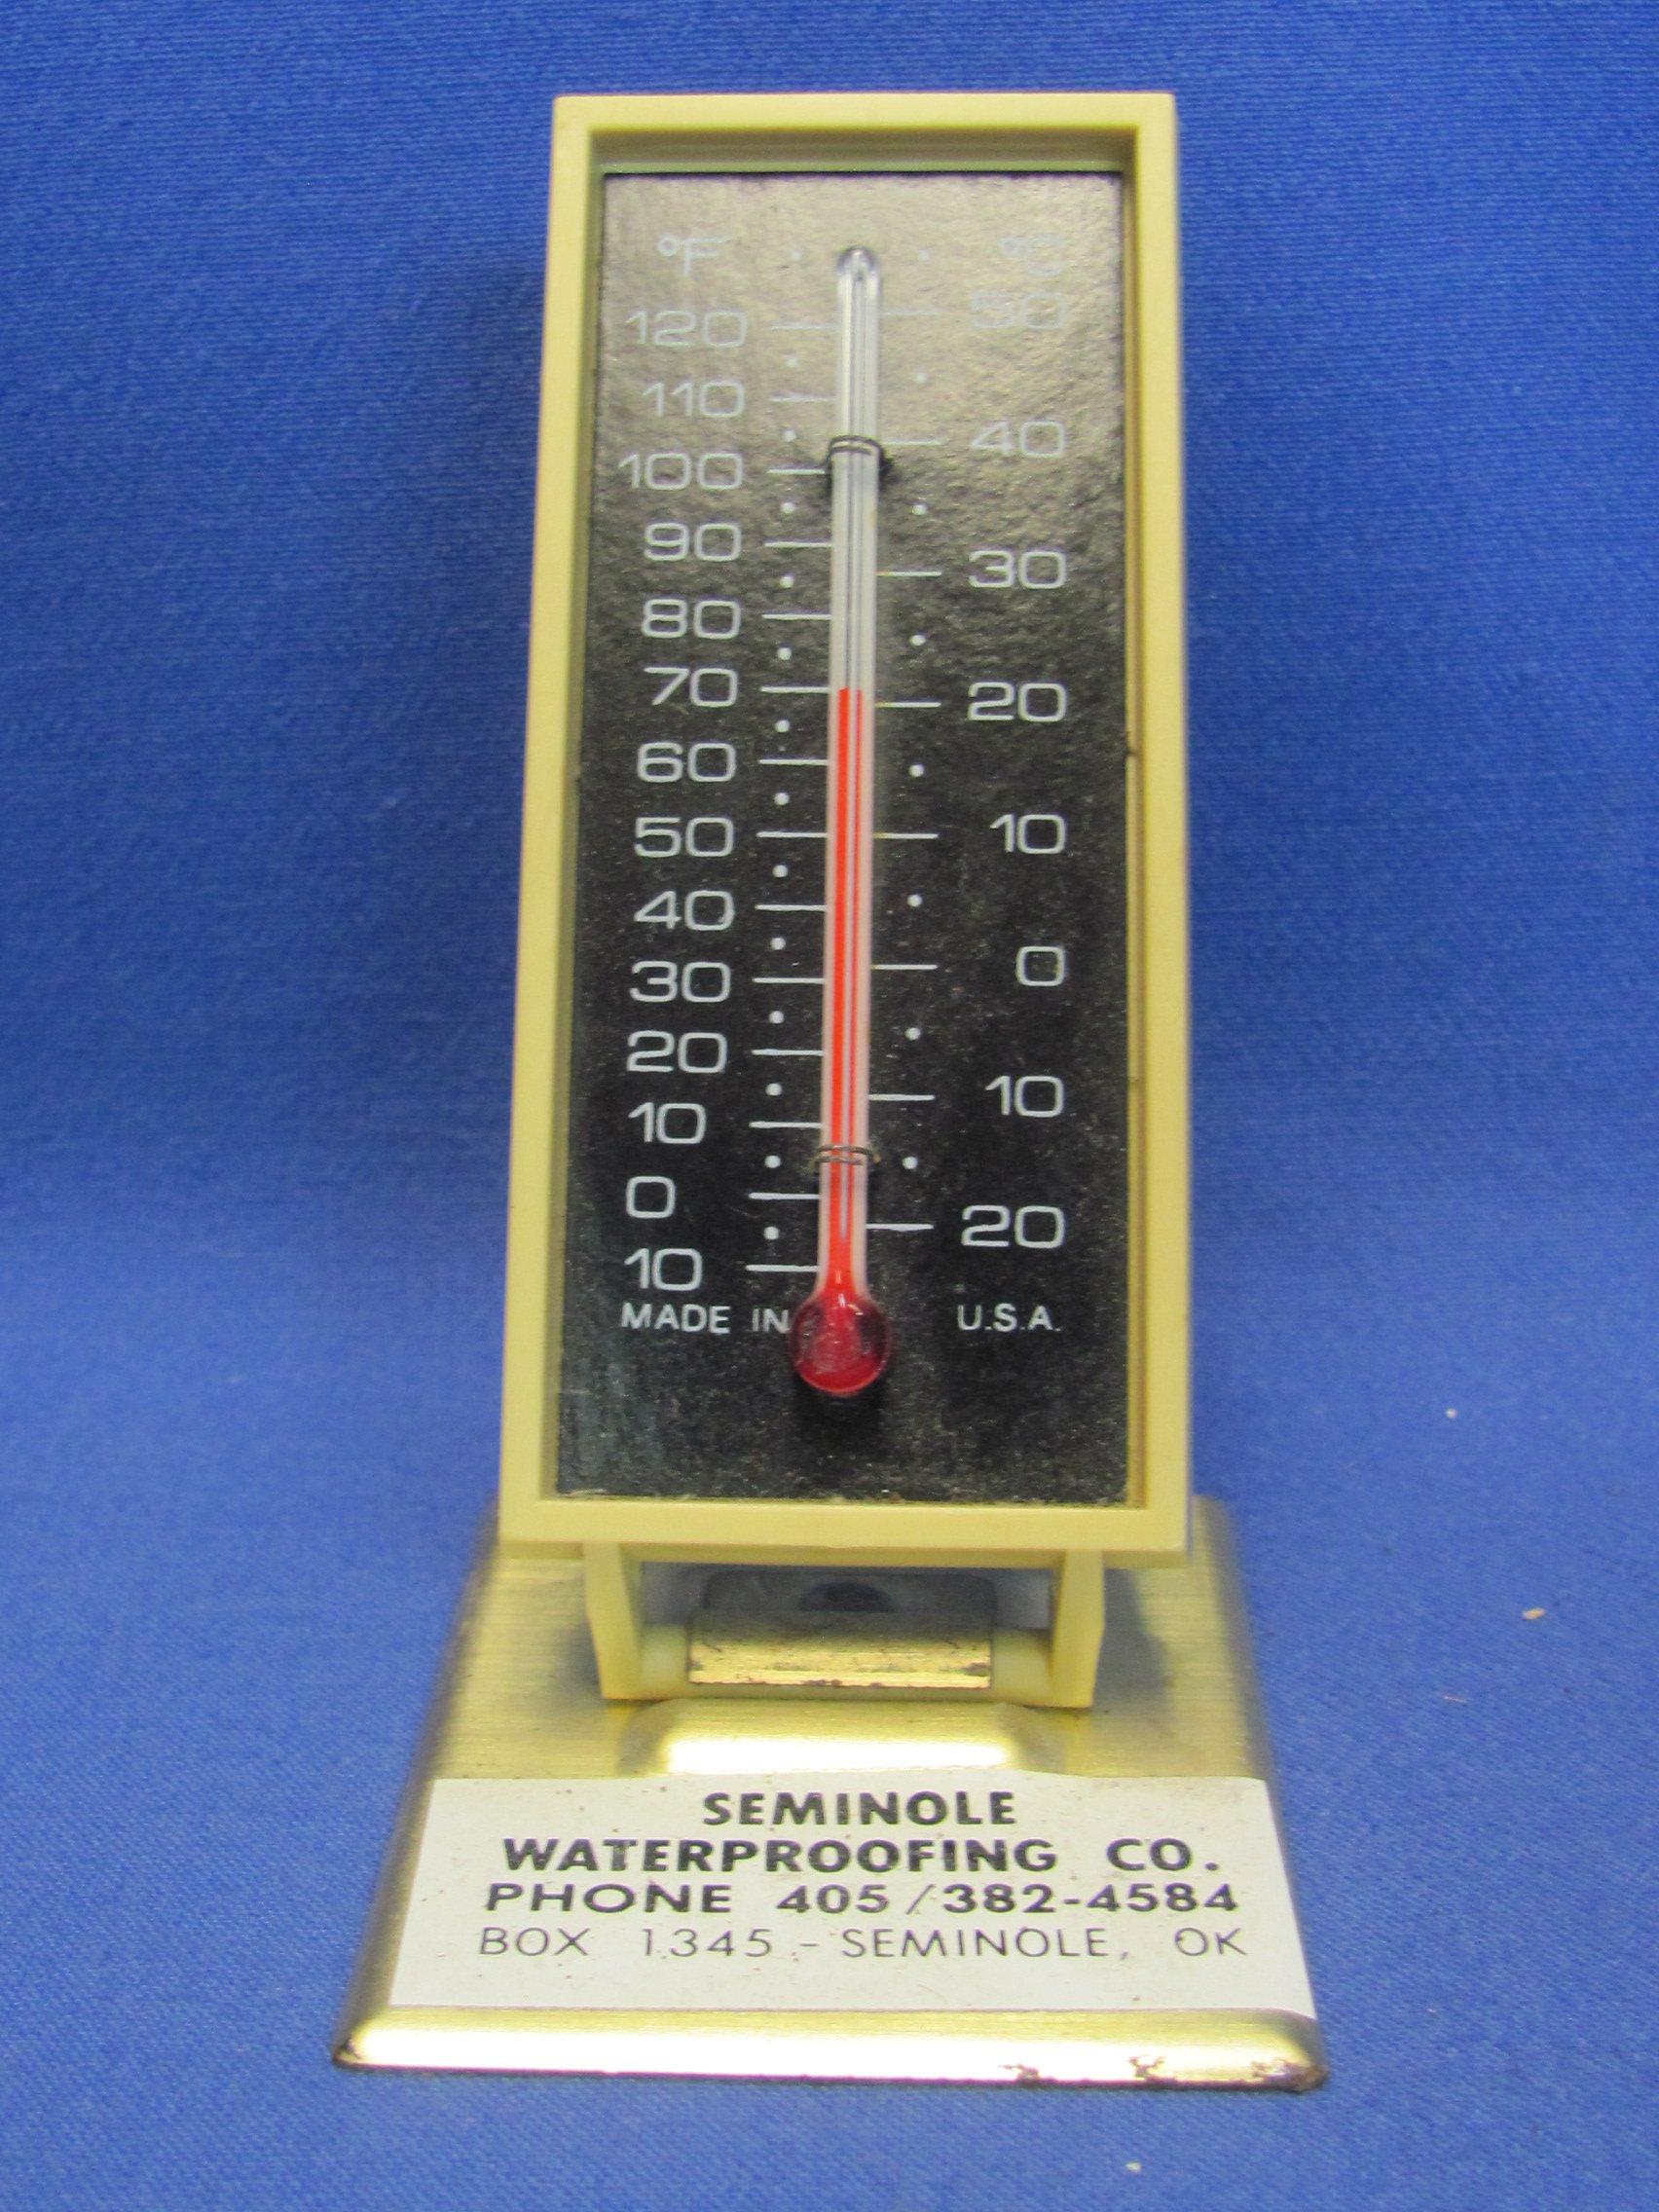 2 Advertising Thermometers from Seminole, Okla. - 4” tall – Contracting & Waterproofing